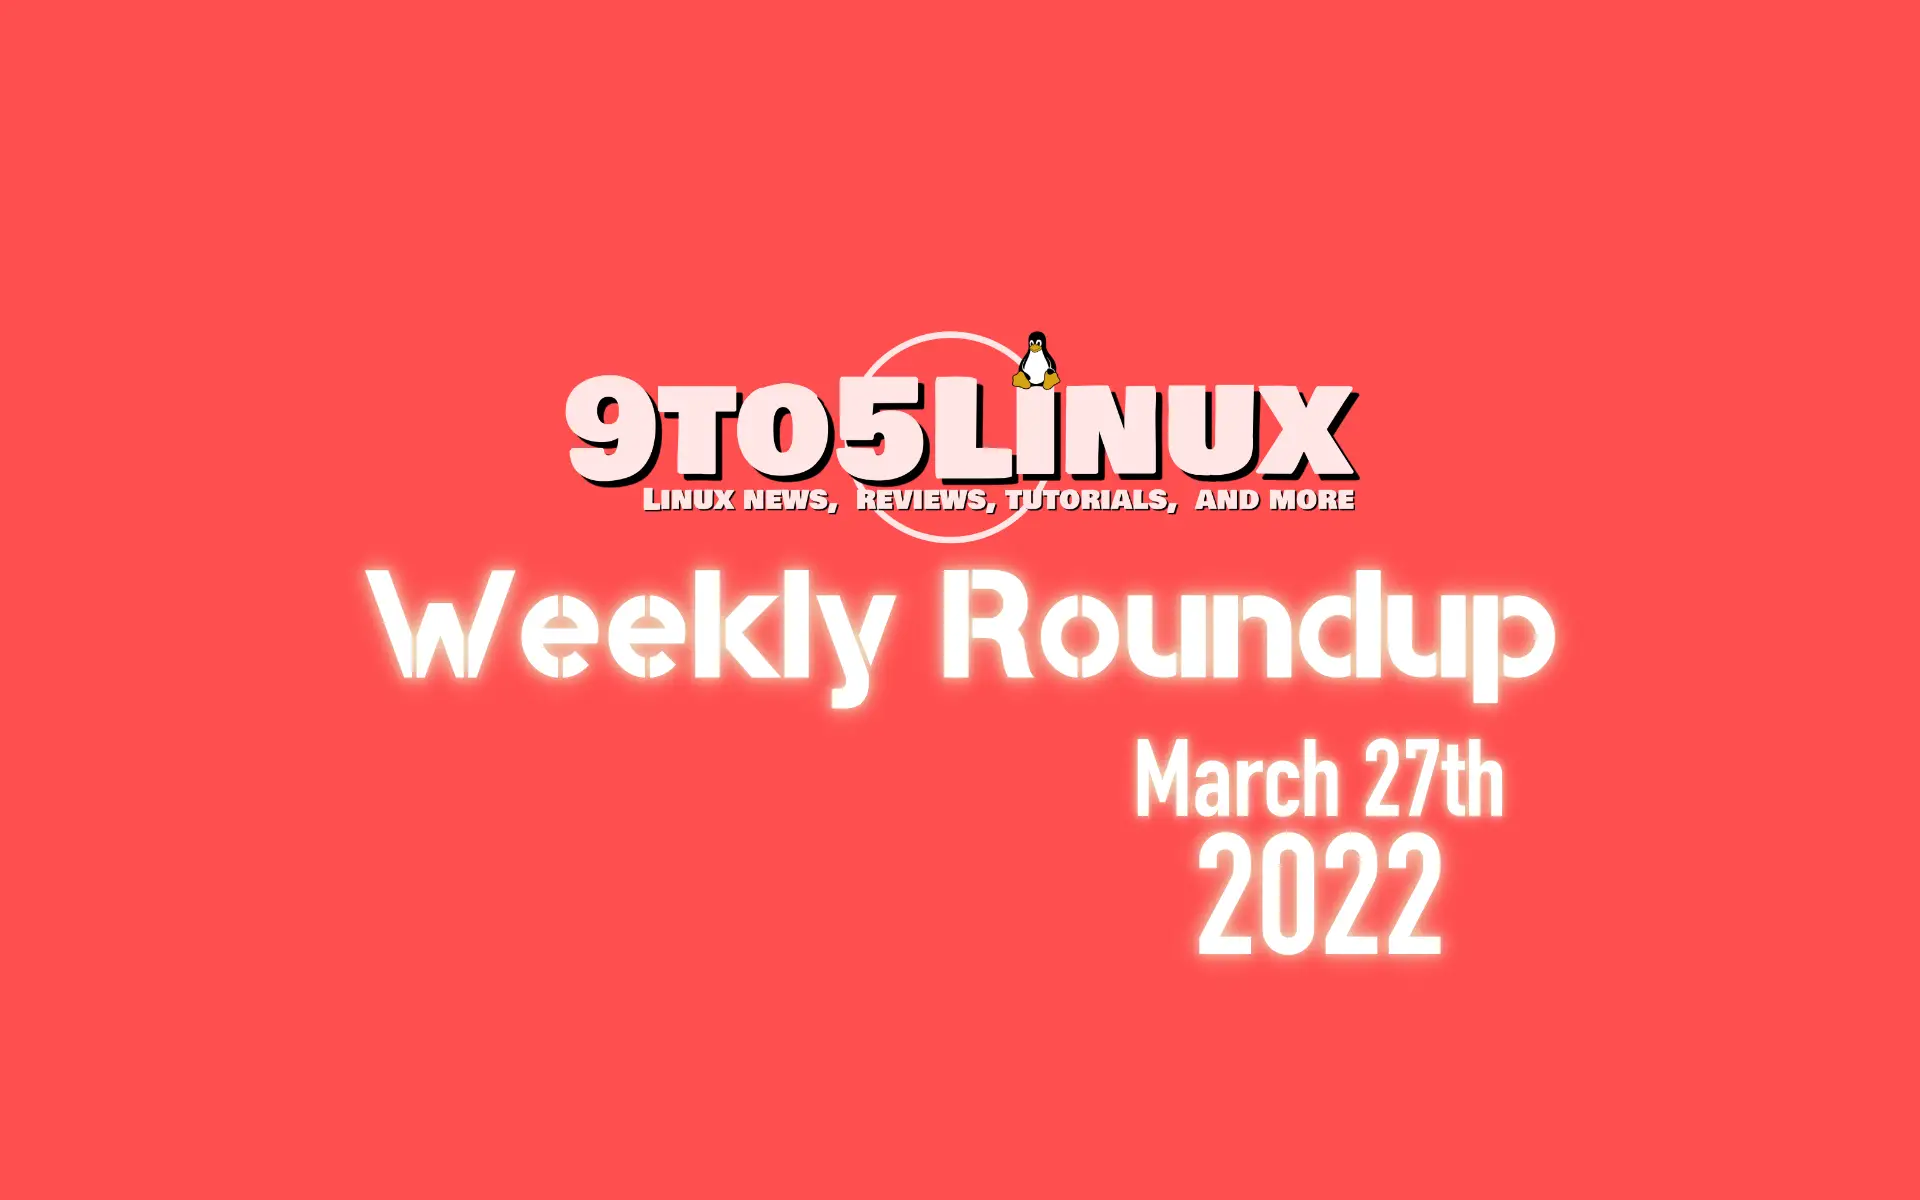 9to5Linux Weekly Roundup: March 27th, 2022